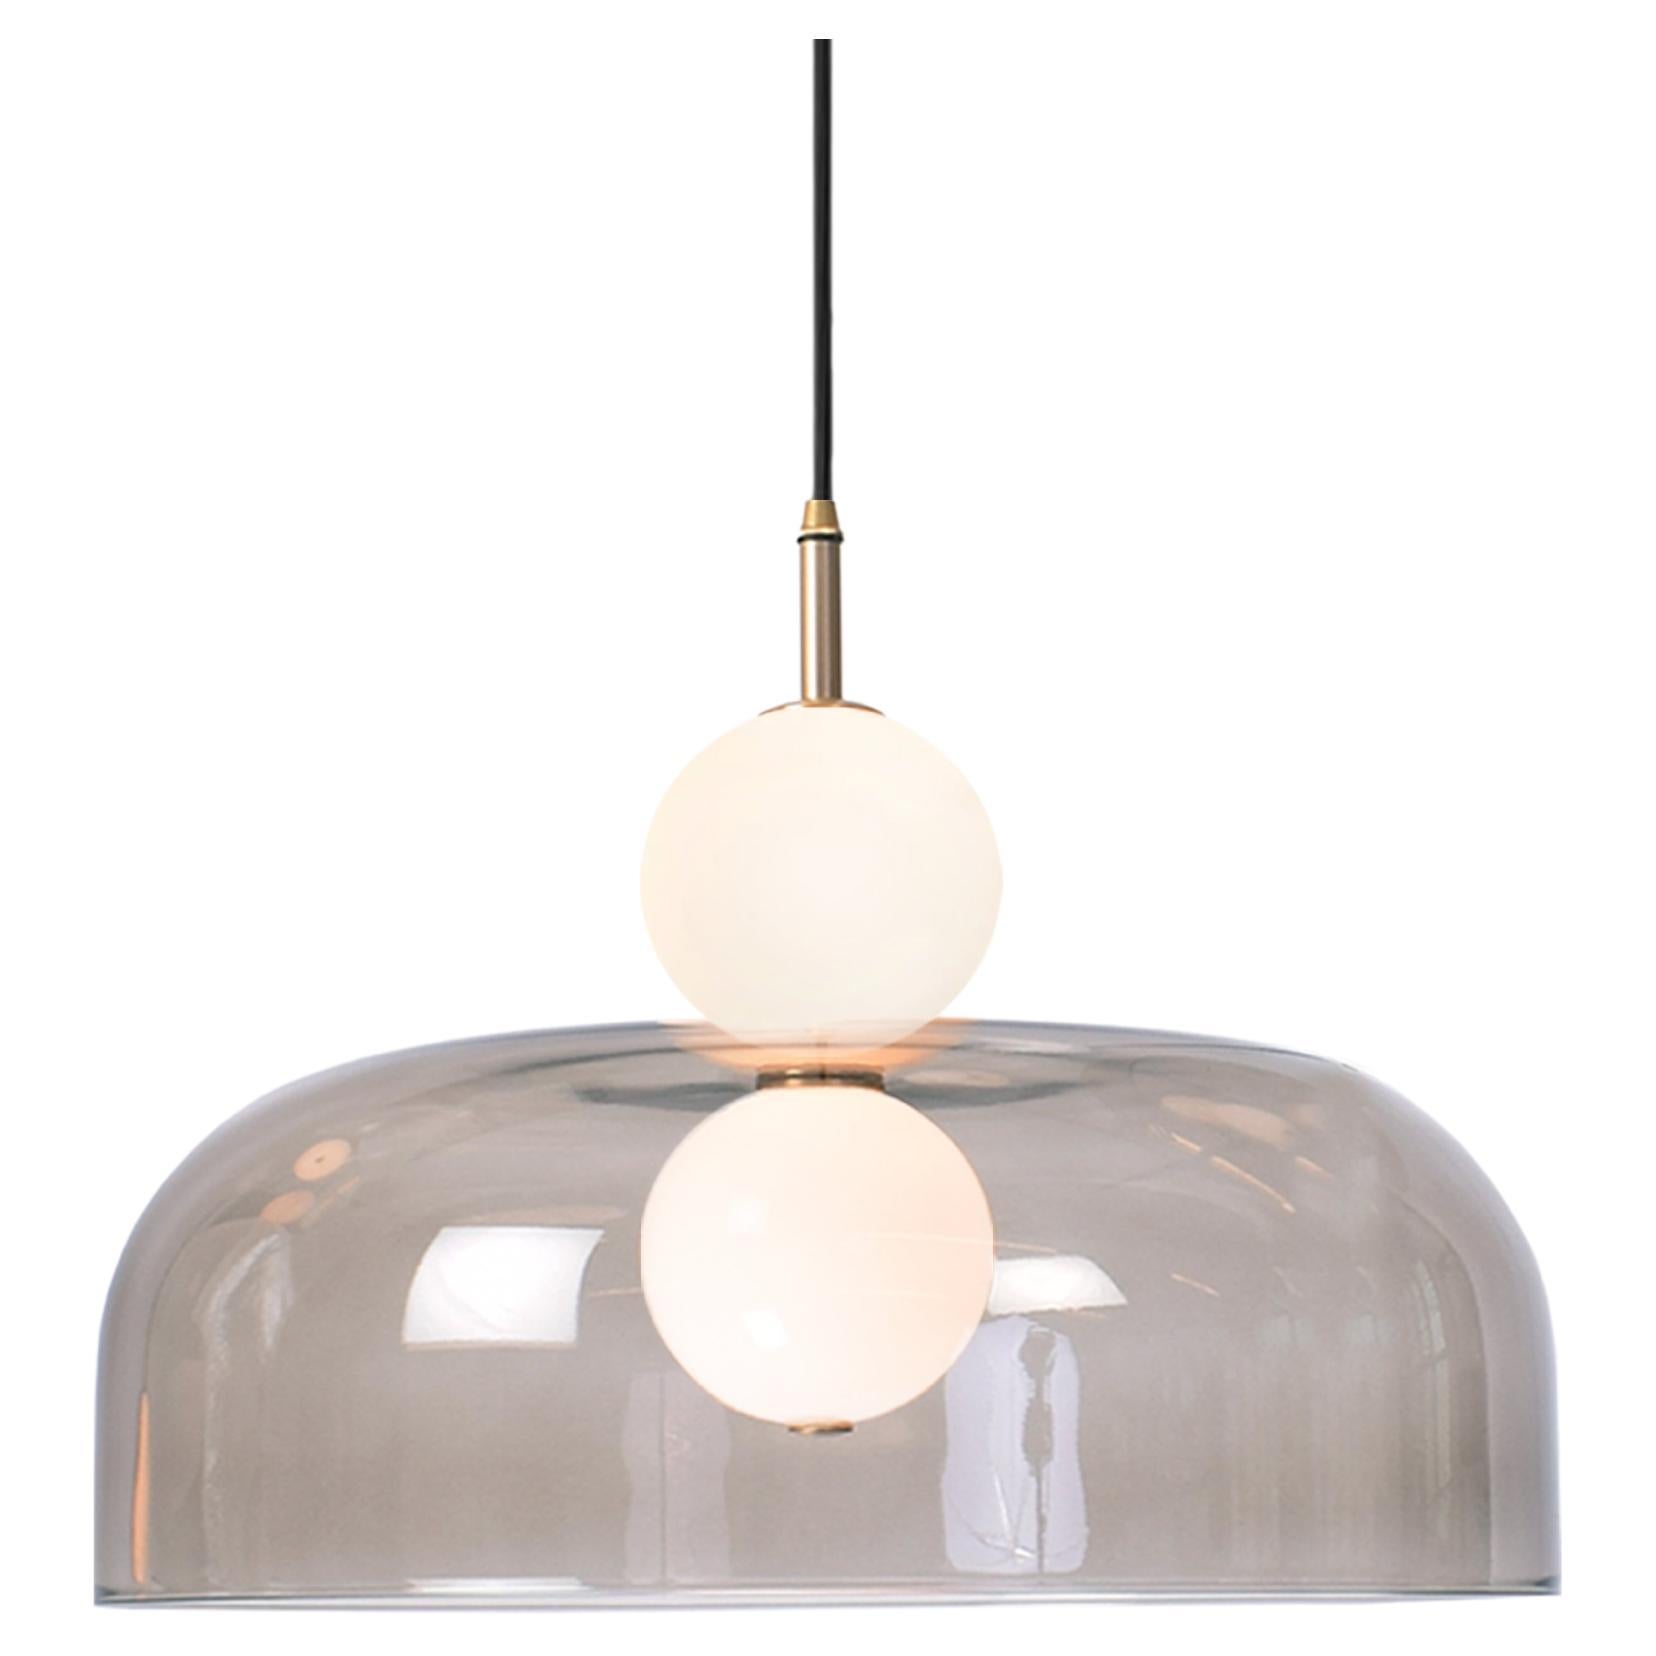 Echo Pendant, Lamp and Shade. Opal Glass Orbs, Smoked Shade and Brass Details. For Sale